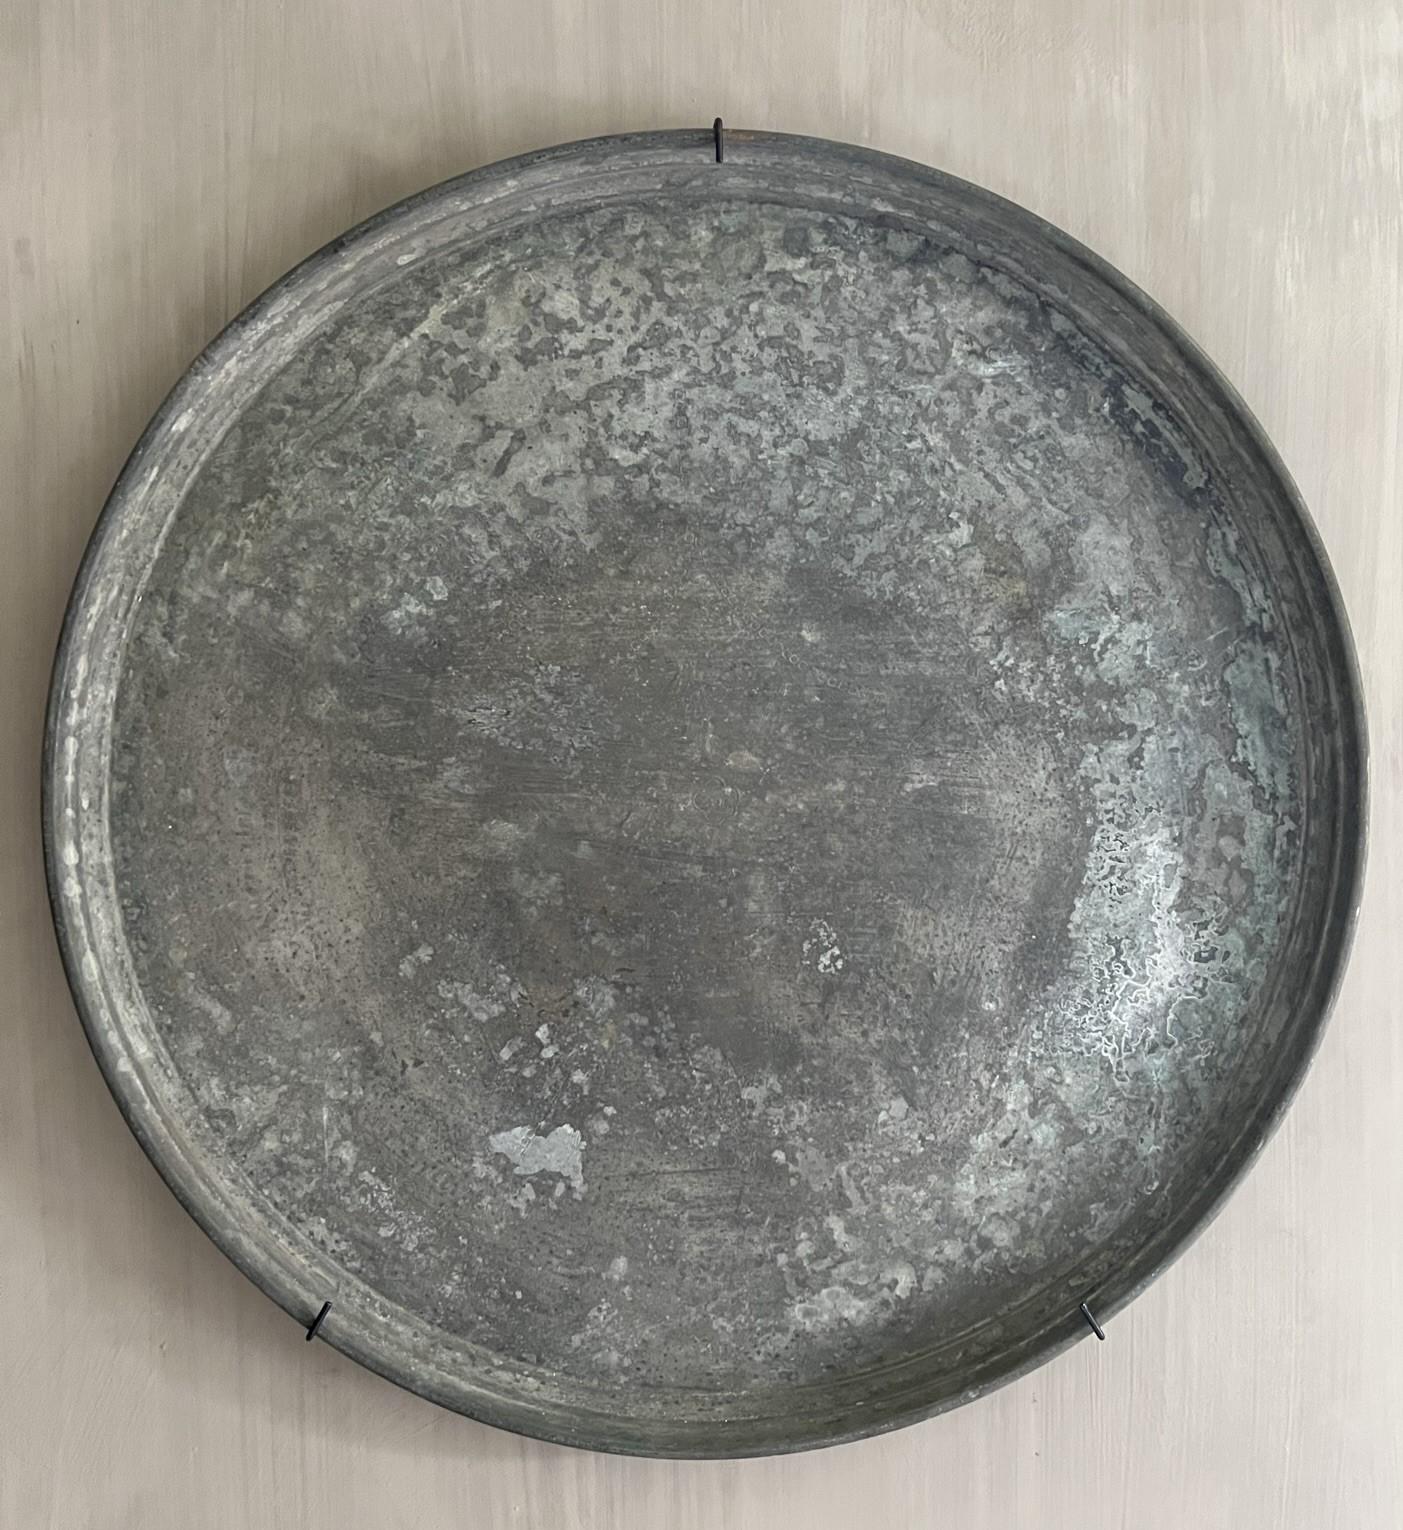 A LARGE OTTOMAN TINNED-COPPER TRAY

Of circular form, the engraved decoration consisting of a central medallion with radiating foliated patterns very good condition overal. Beautiful silver green patina. Mounted on a wall it has the attraction of a